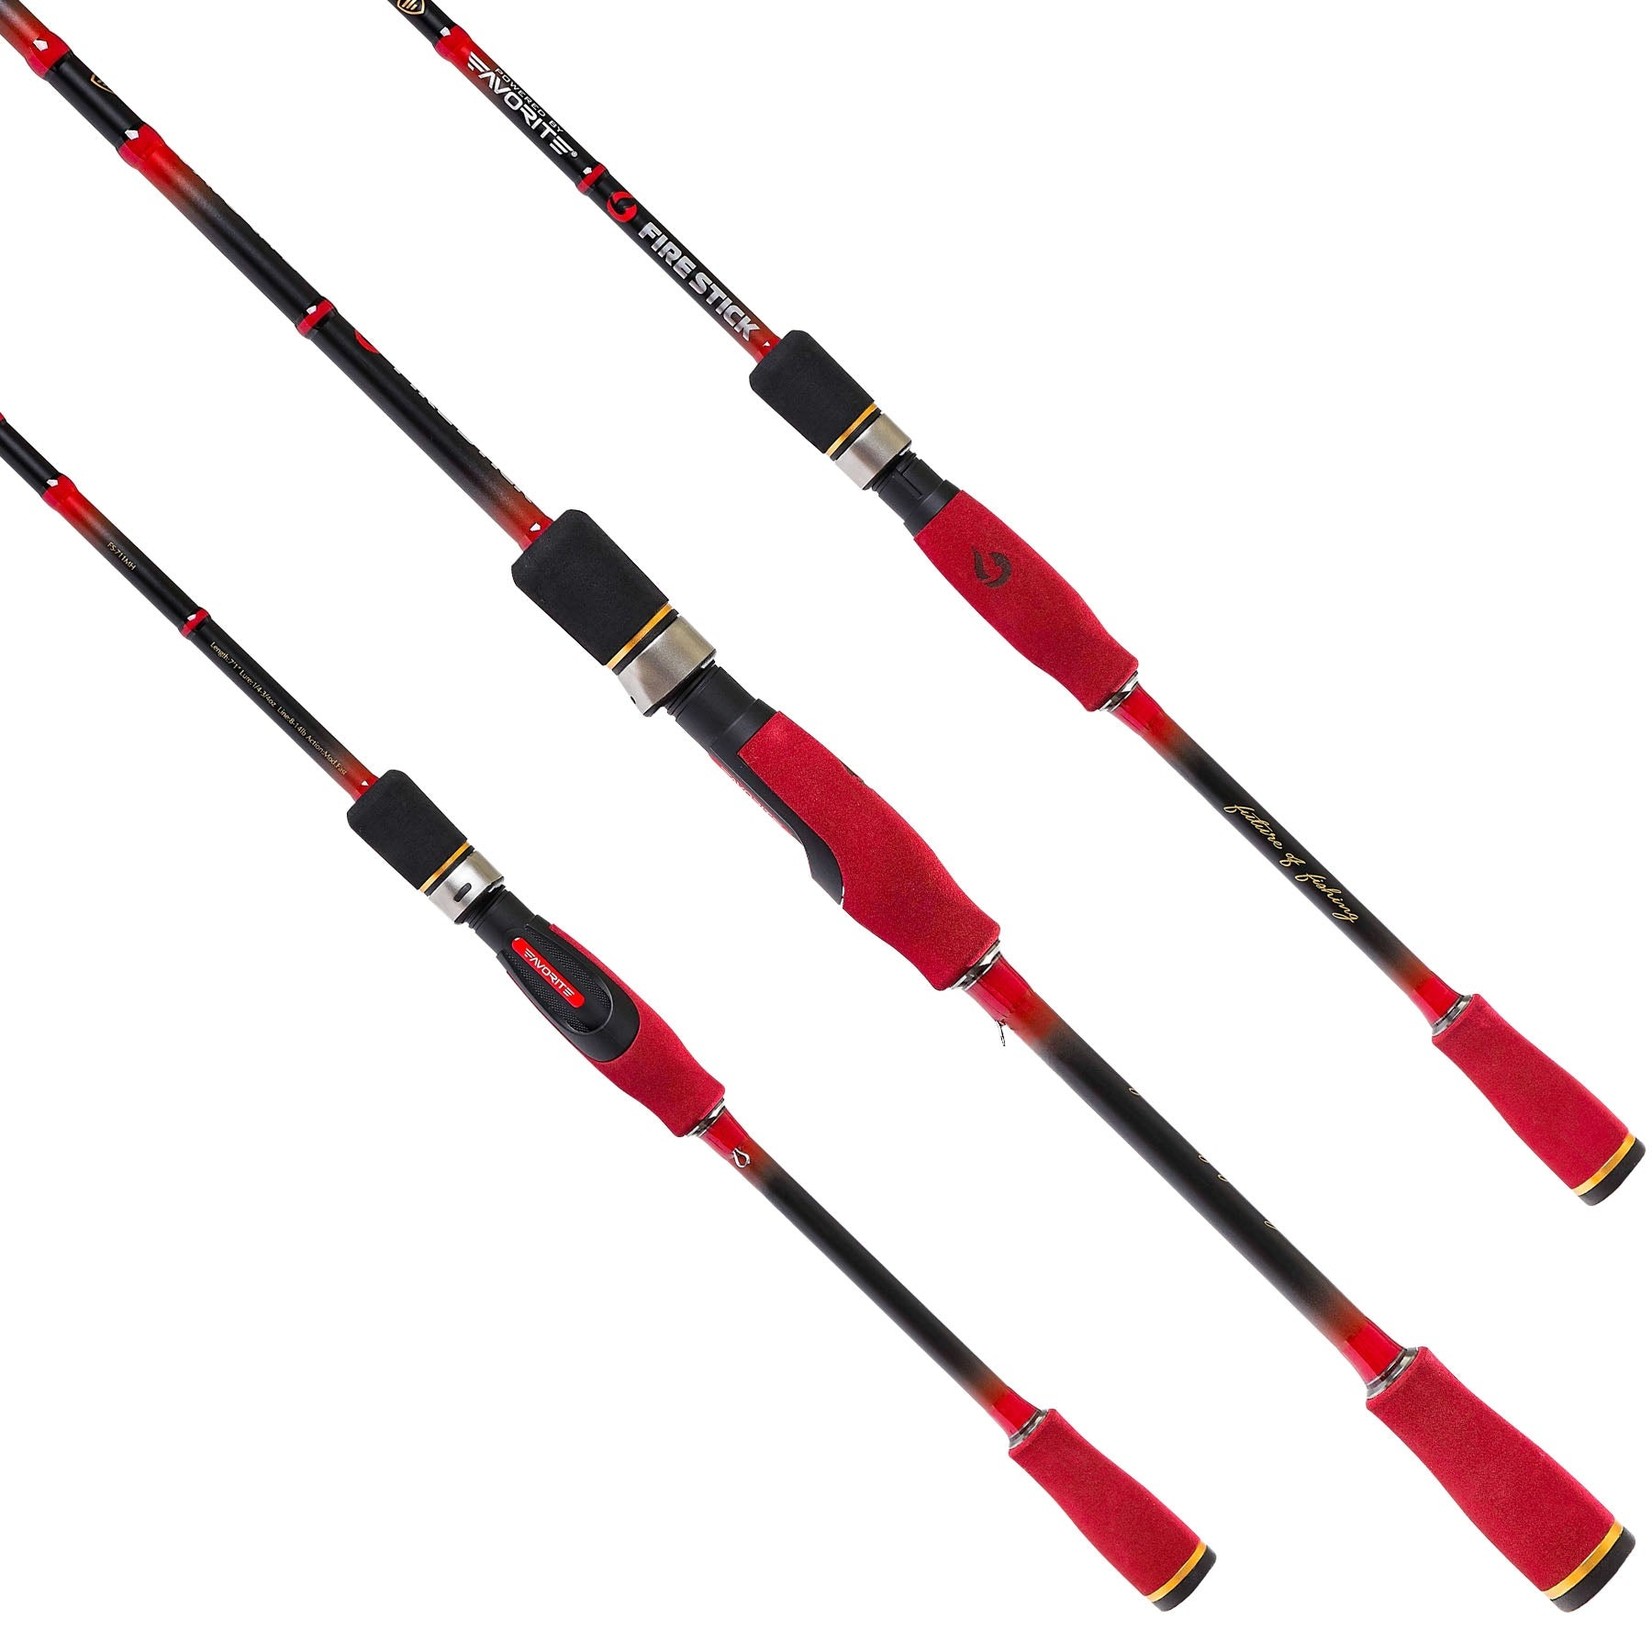 Favorite Favorite Fire Stick Spinning Rod - 7'1" MH